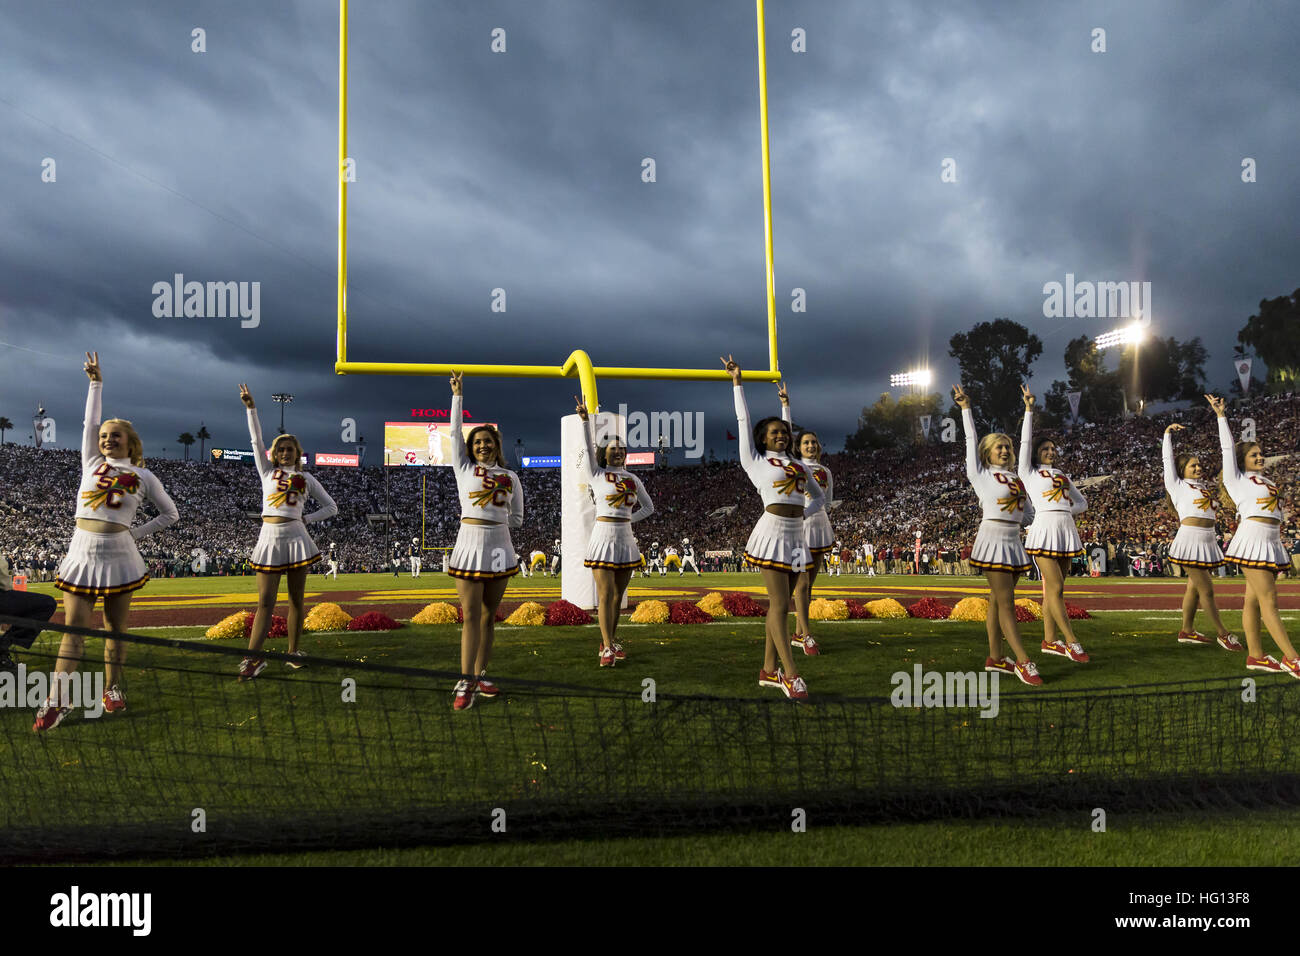 California, USA. 2nd Jan, 2017.  USC cheerleaders pump up the crowd in the second half during the Rose Bowl Game between Penn State Nittany Lions and University of Southern California Trojans at Rose Bowl Stadium in Pasadena, California. USC won 52-49. © Scott Taetsch/ZUMA Wire/Alamy Live News Stock Photo